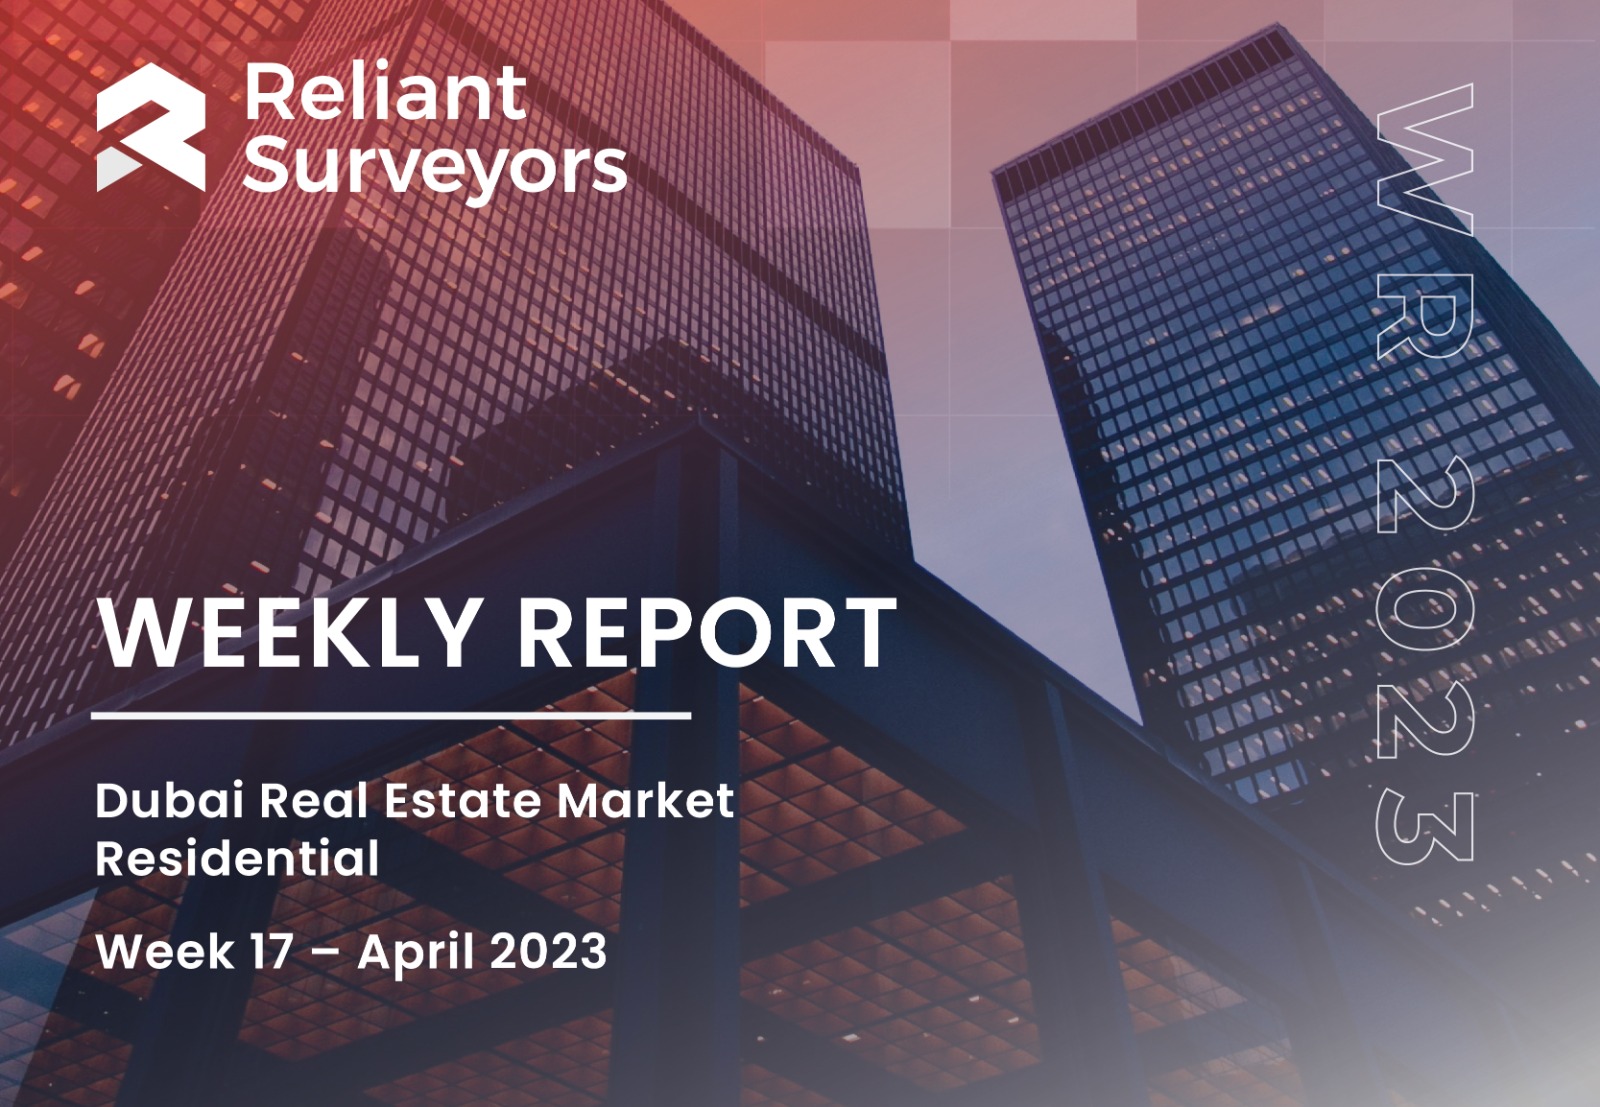 Real estate Research report 17 - Dubai realestate market - Residential - Week 17 – April 2023. Reliant surveyors - valuation company in Dubai